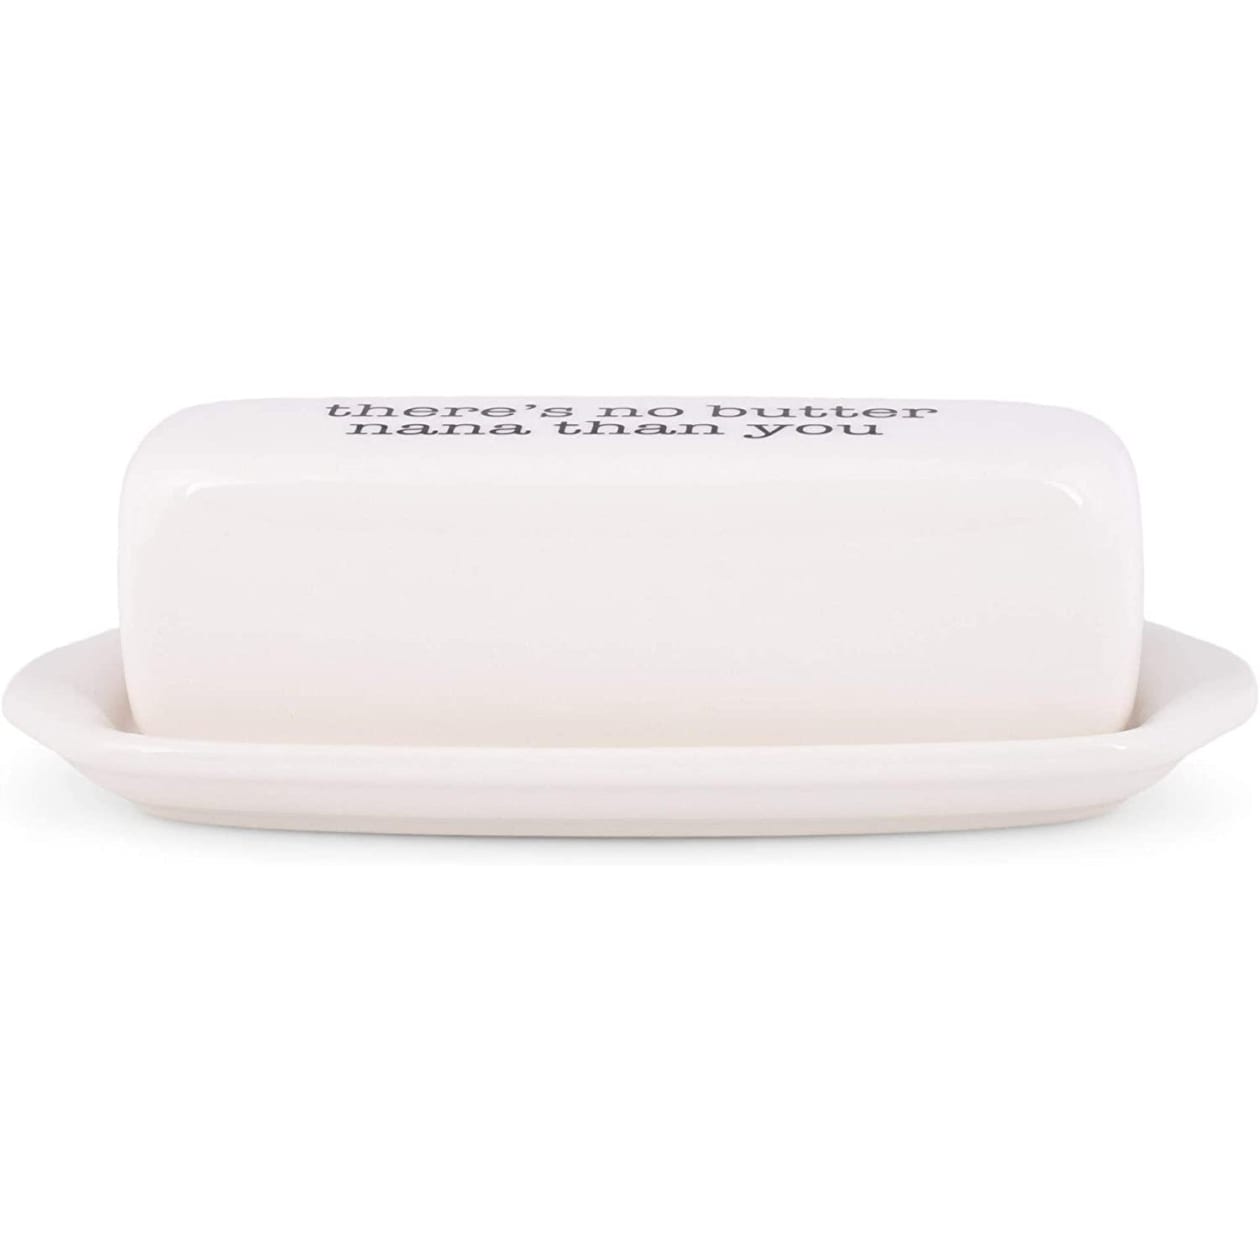 There's No Butter Nana Than You Butter Dish Tray with Lid | Ceramic 8.5"L x 3.5"W